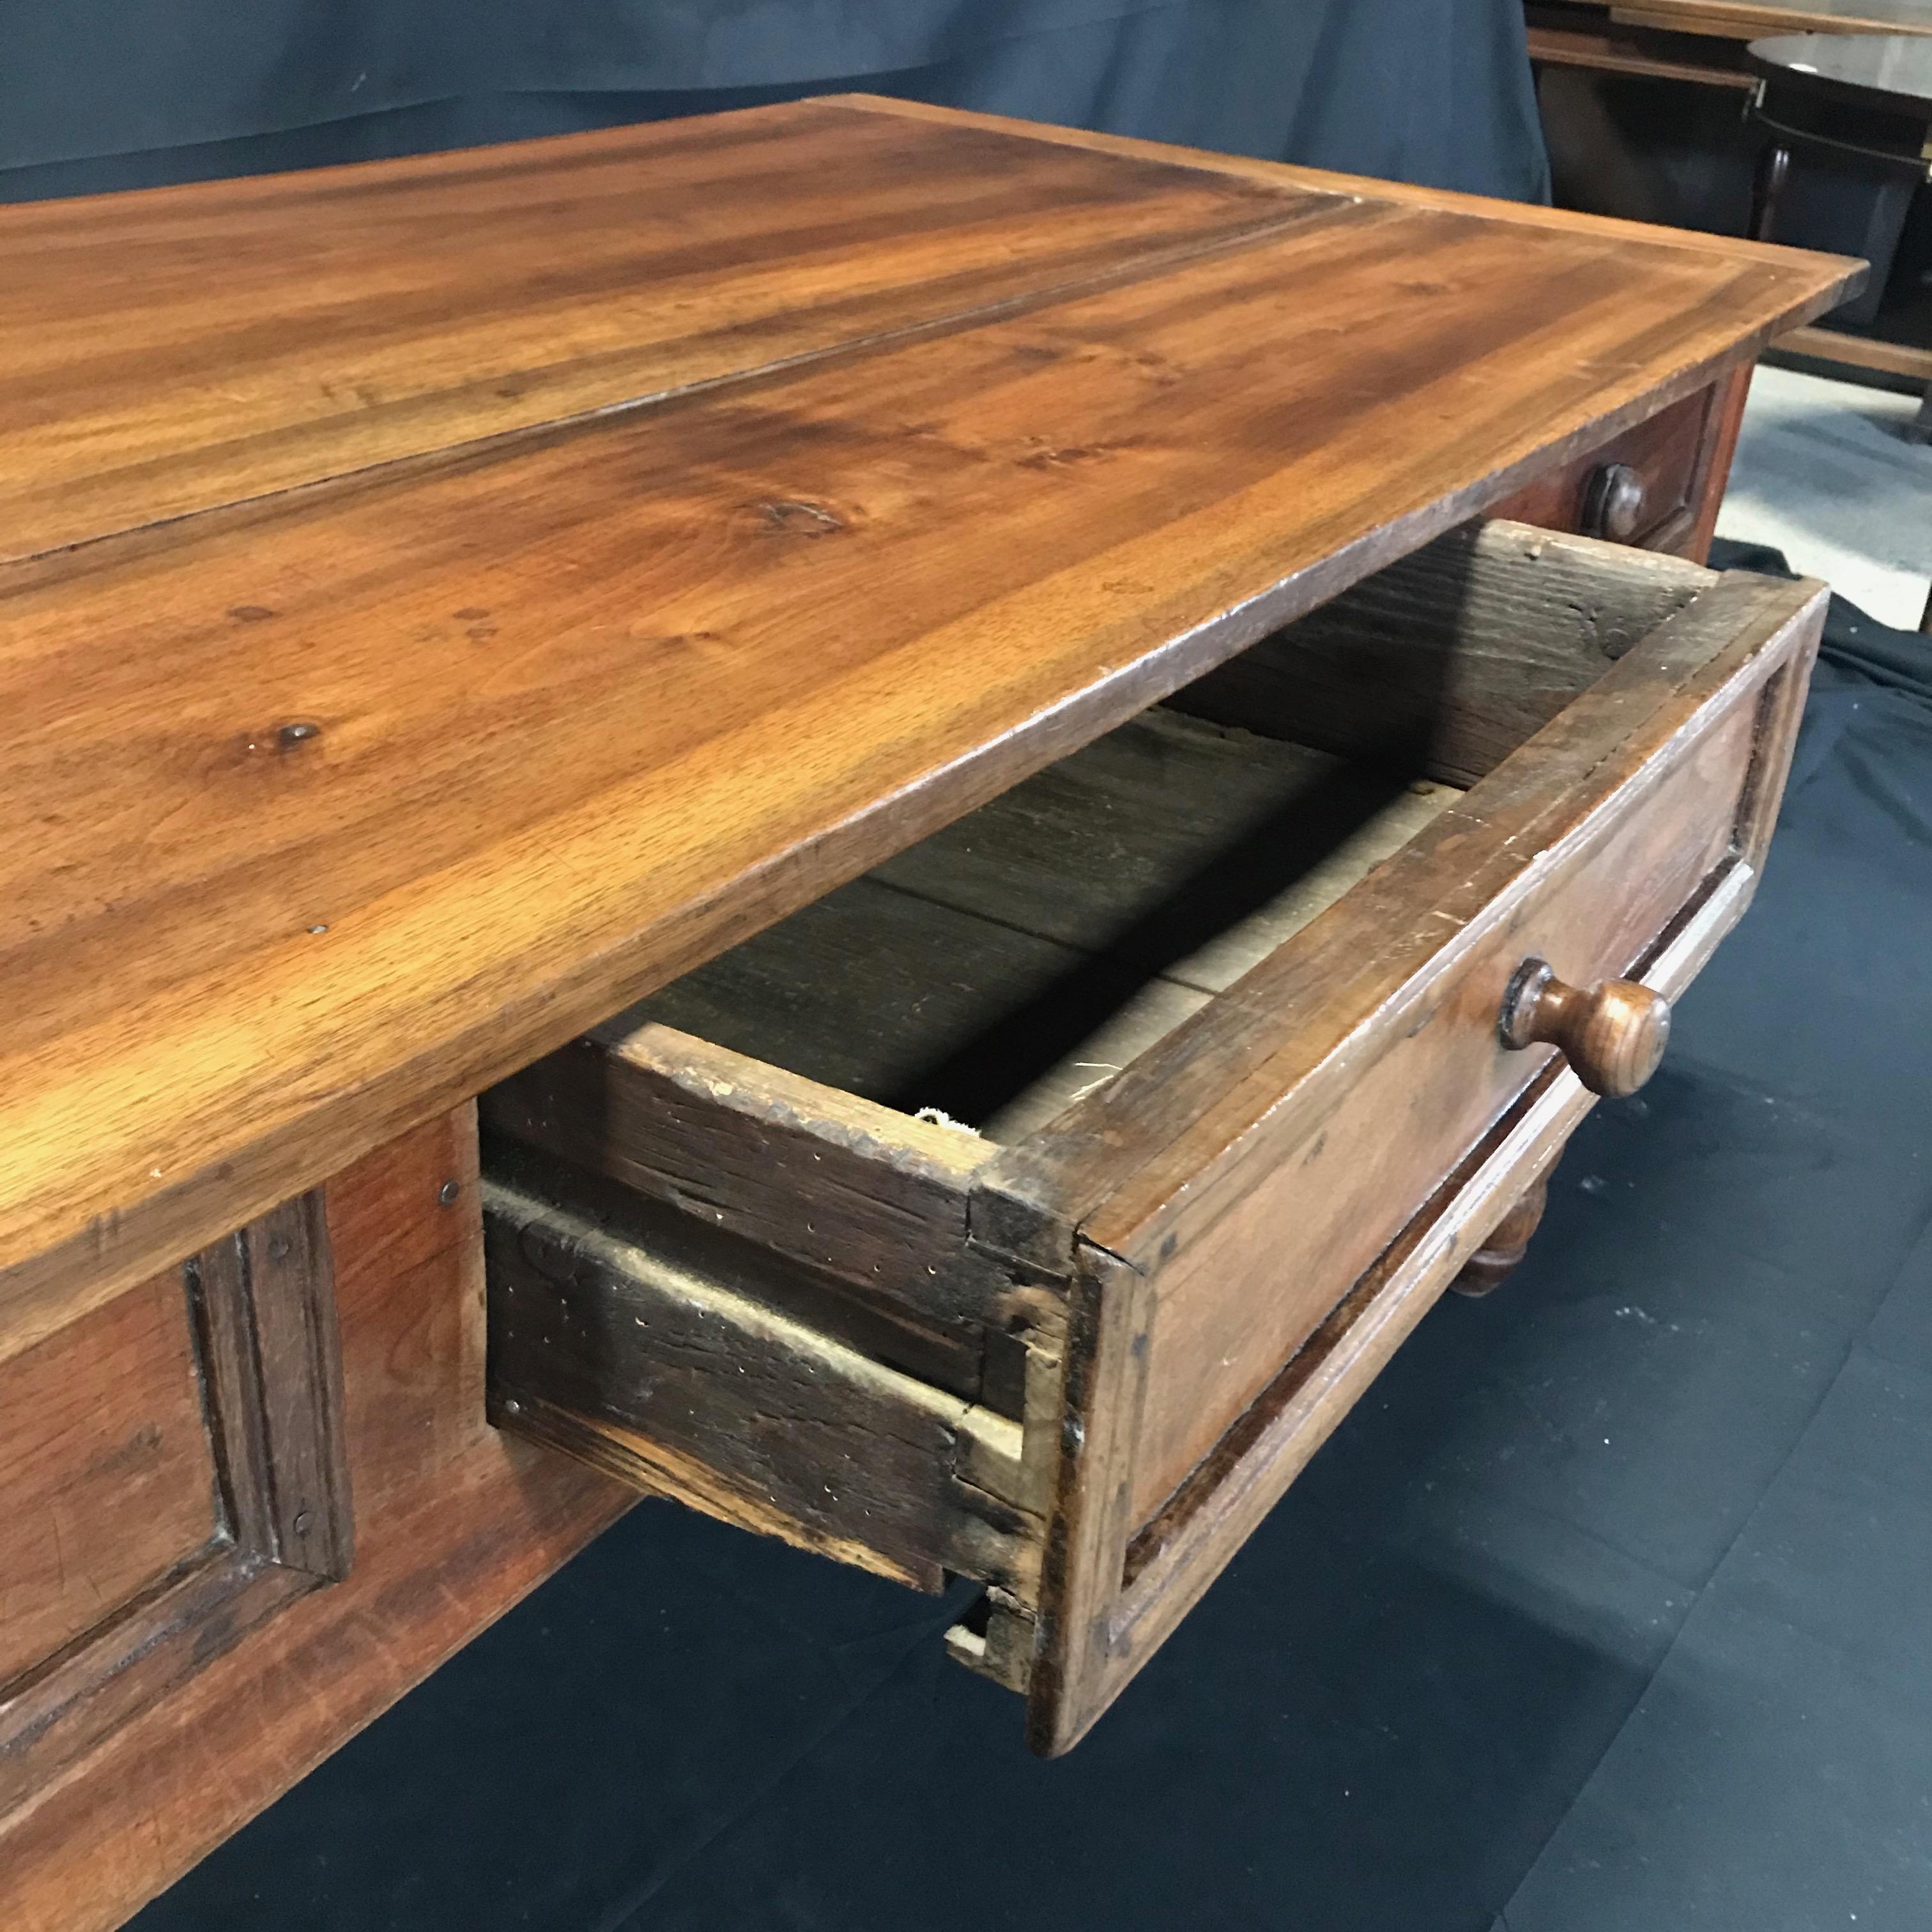 French Provincial Oozing with Character Large 19th Century Walnut Farm Table or Kitchen Island